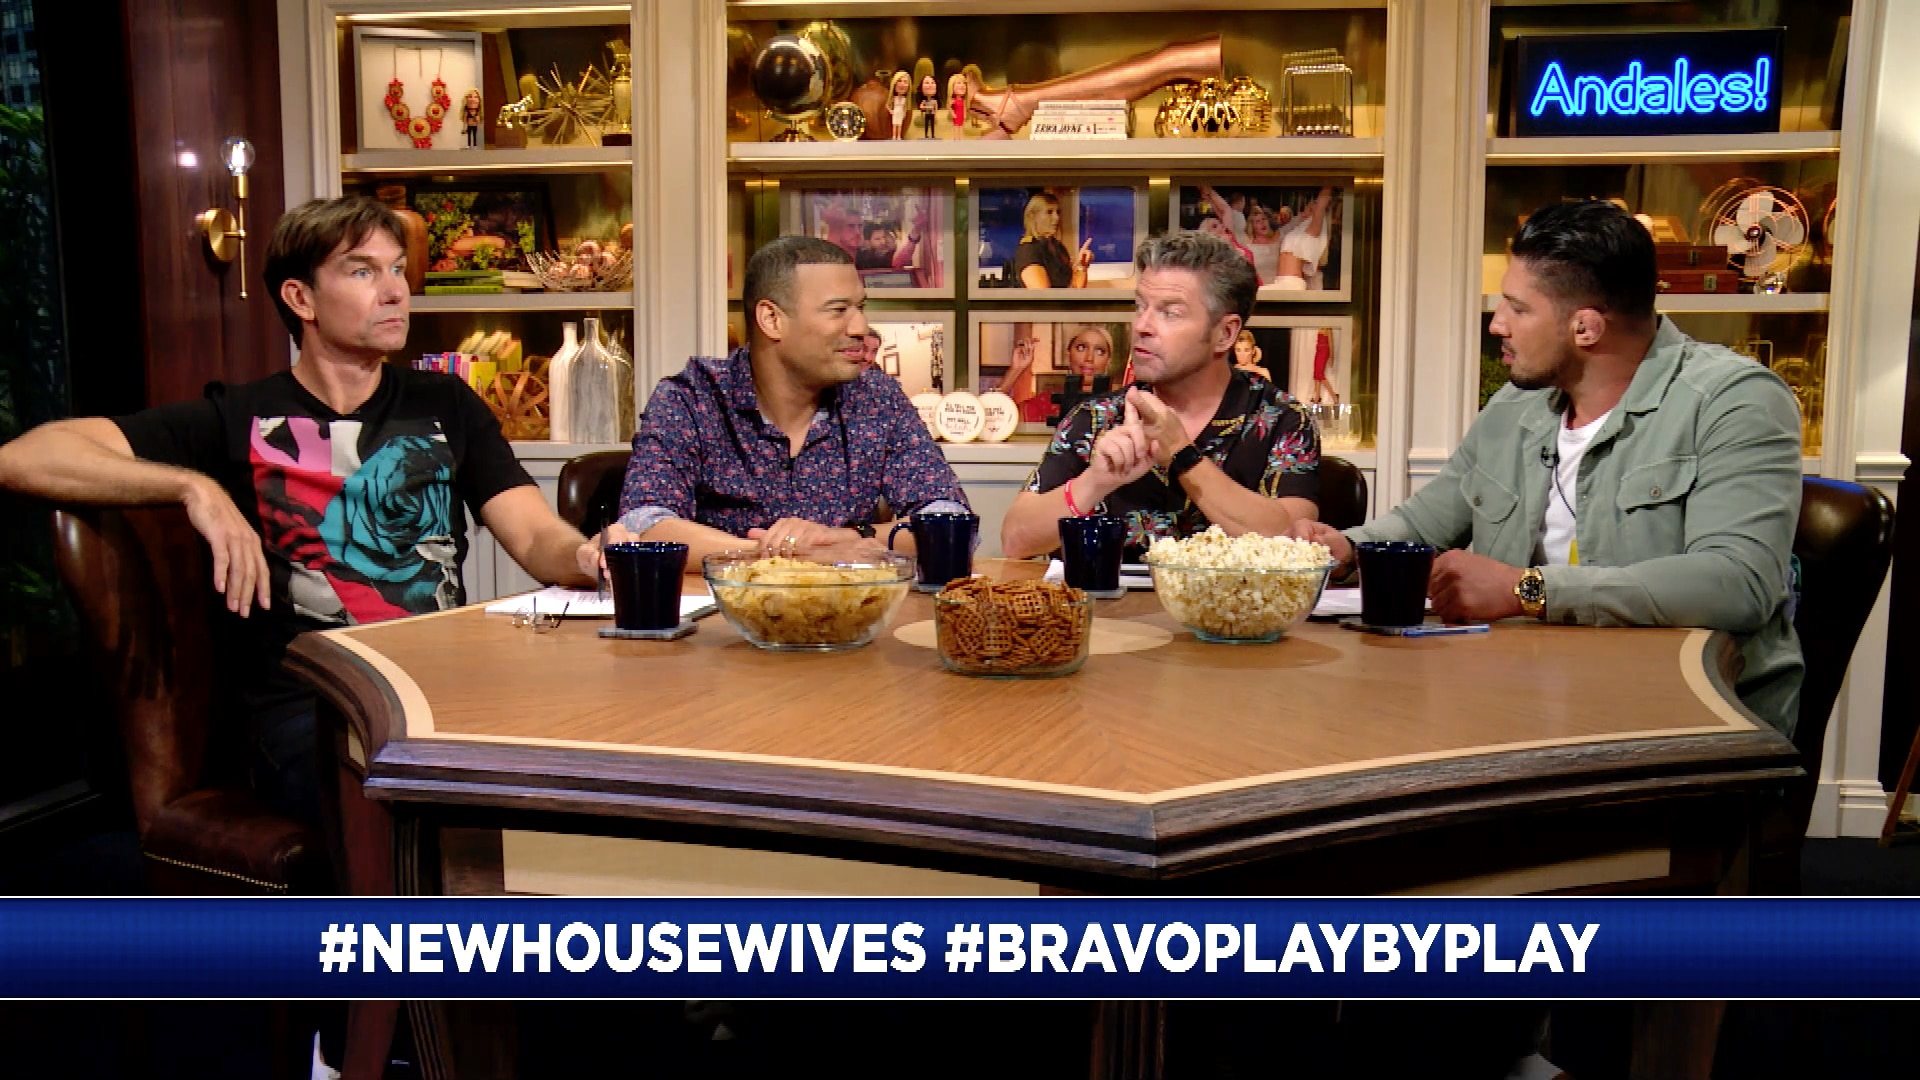 The Play by Play Panel Reveals Their Favorite New Housewives